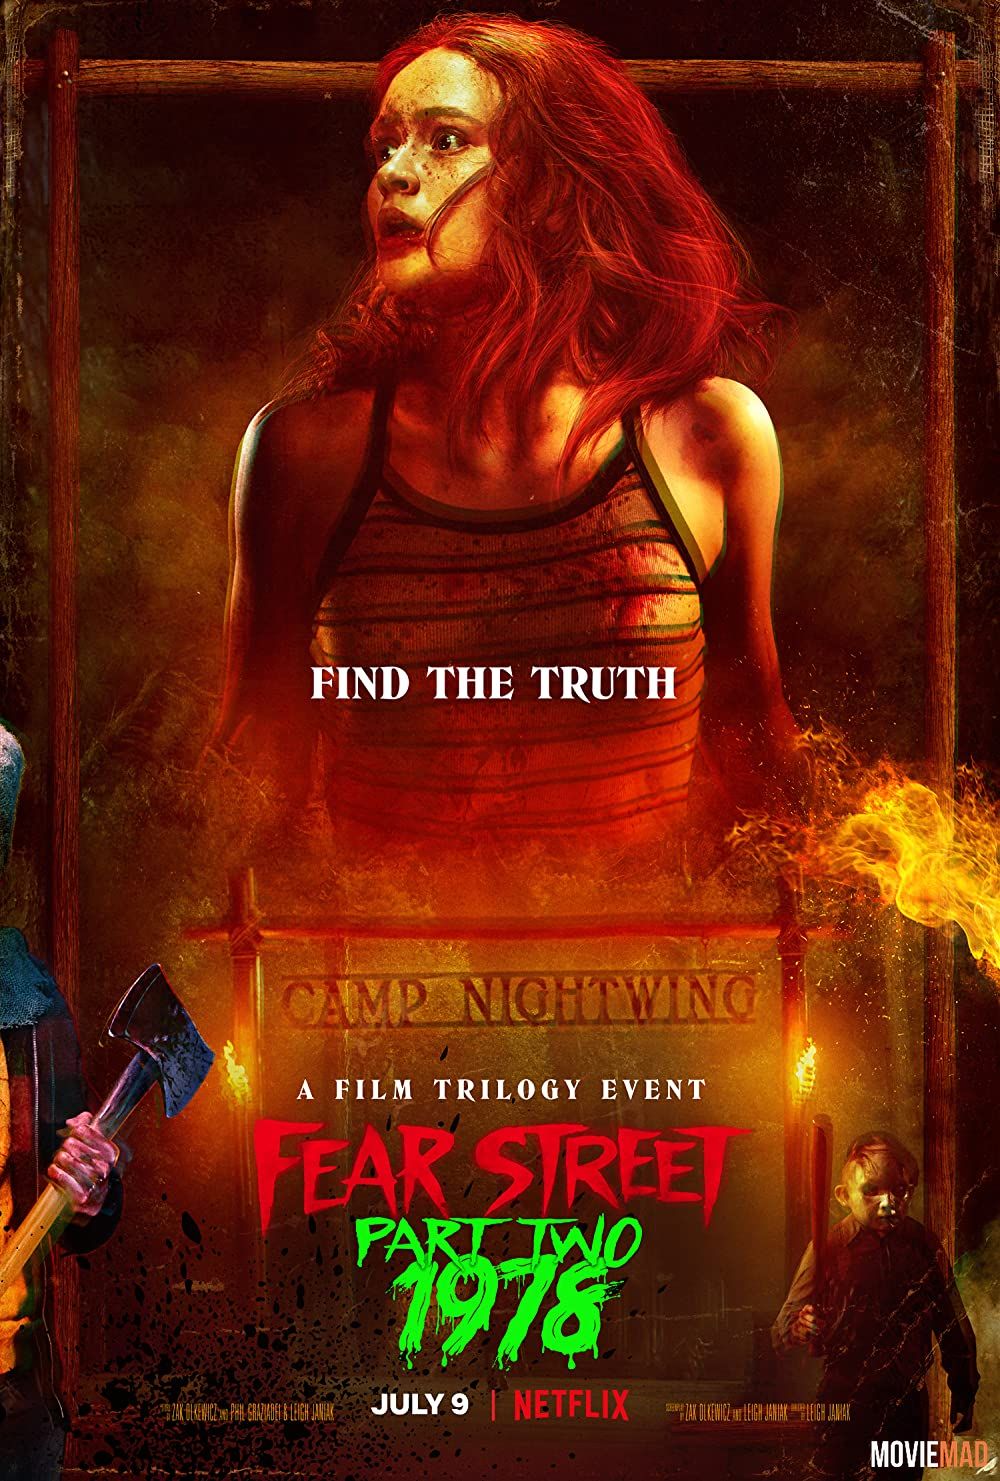 Fear Street Part Two 1978 (2021) Hindi Dubbed ORG WEB DL NF Full Movie 720p 480p